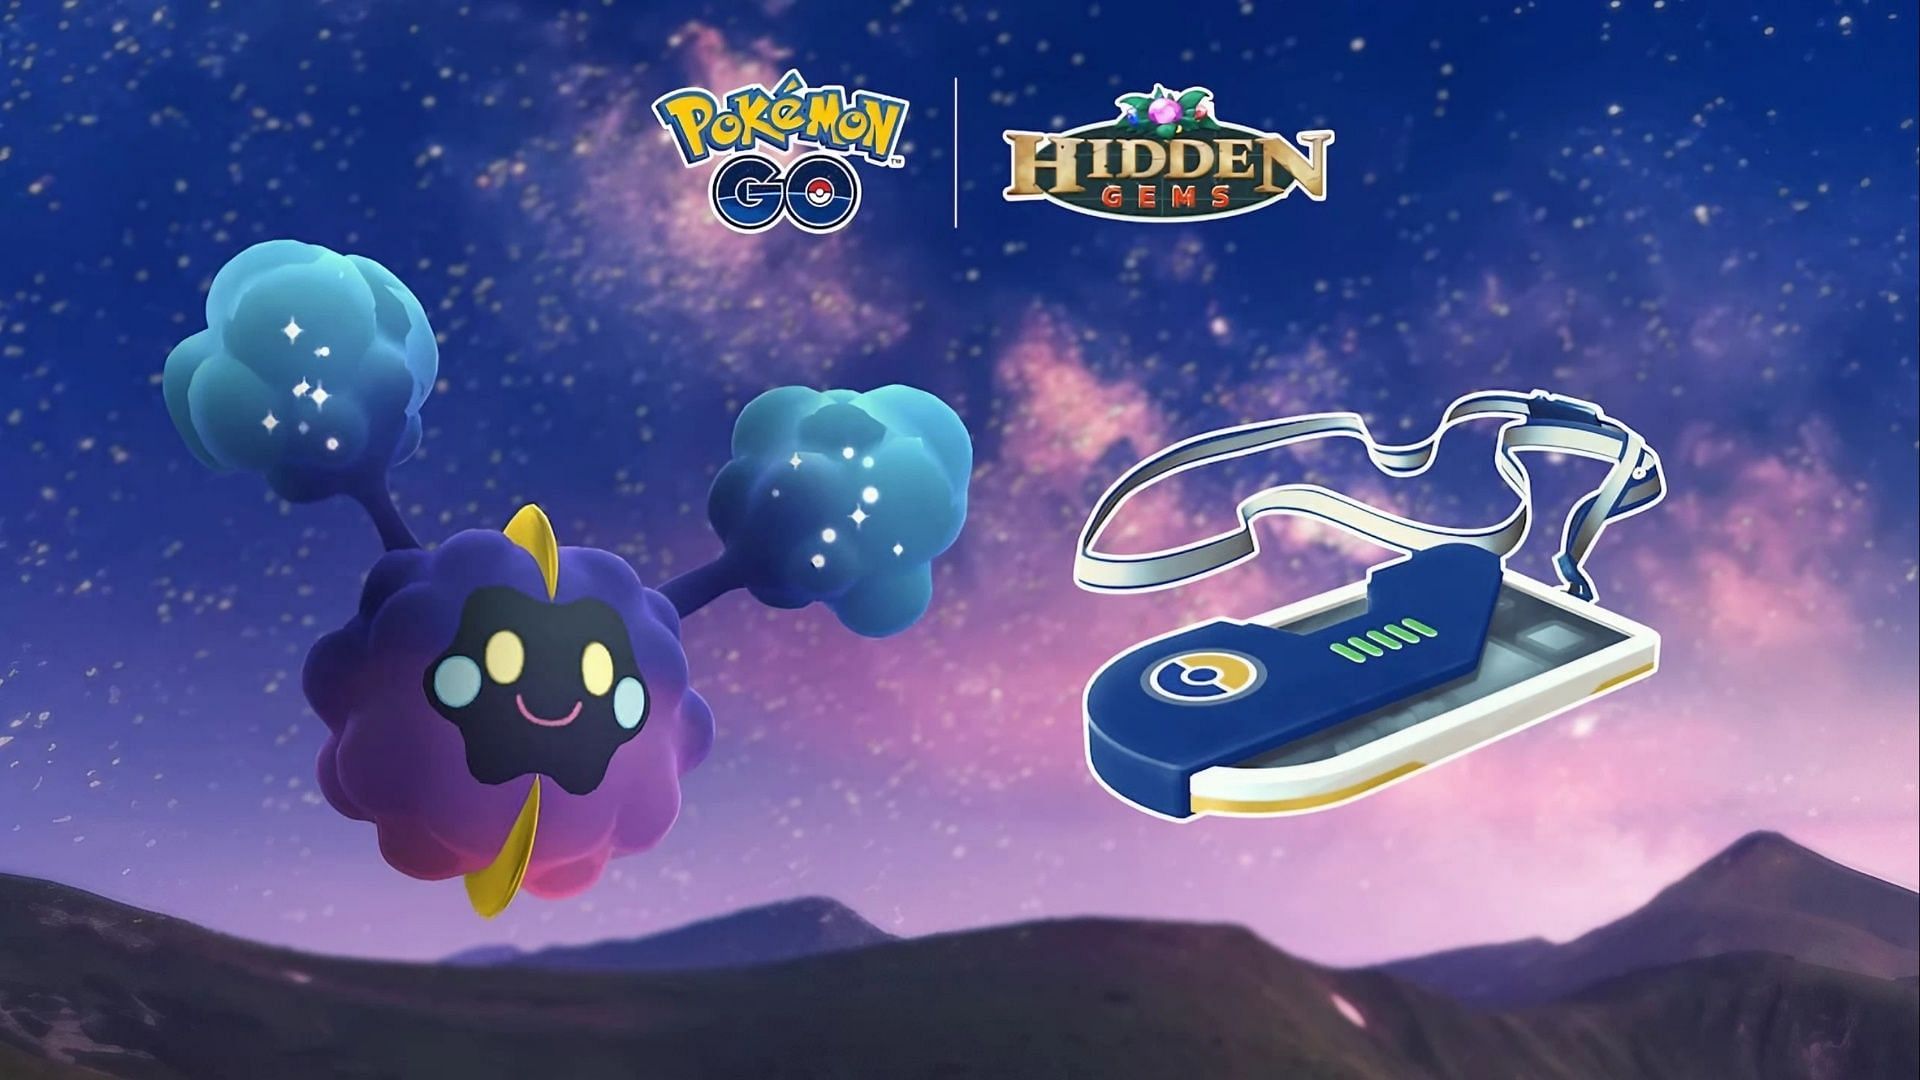 Pokemon GO Solstice Horizons All Special Research tasks and rewards